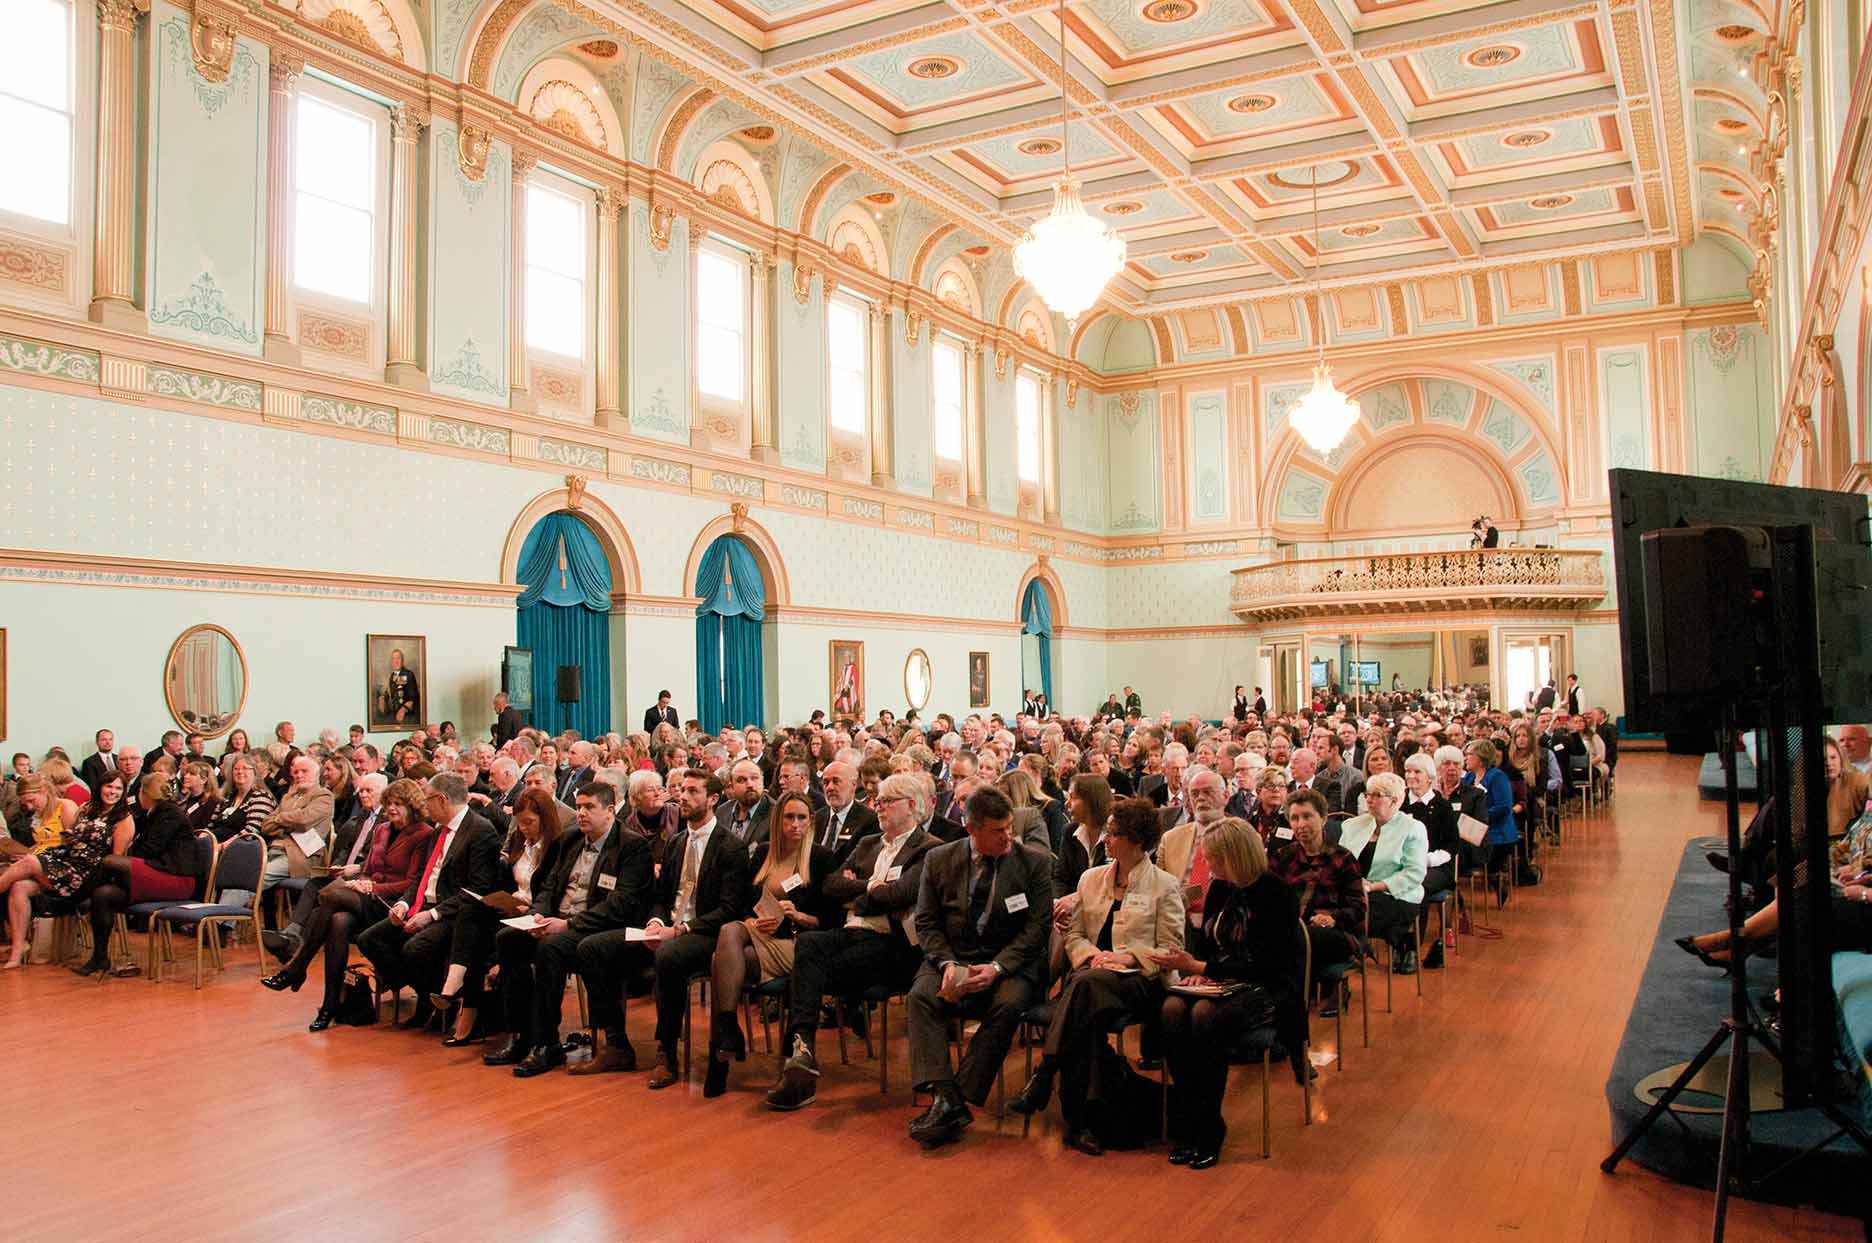 More than 350 members of the Landcare community attended the Victorian Landcare Awards at Government House in September.